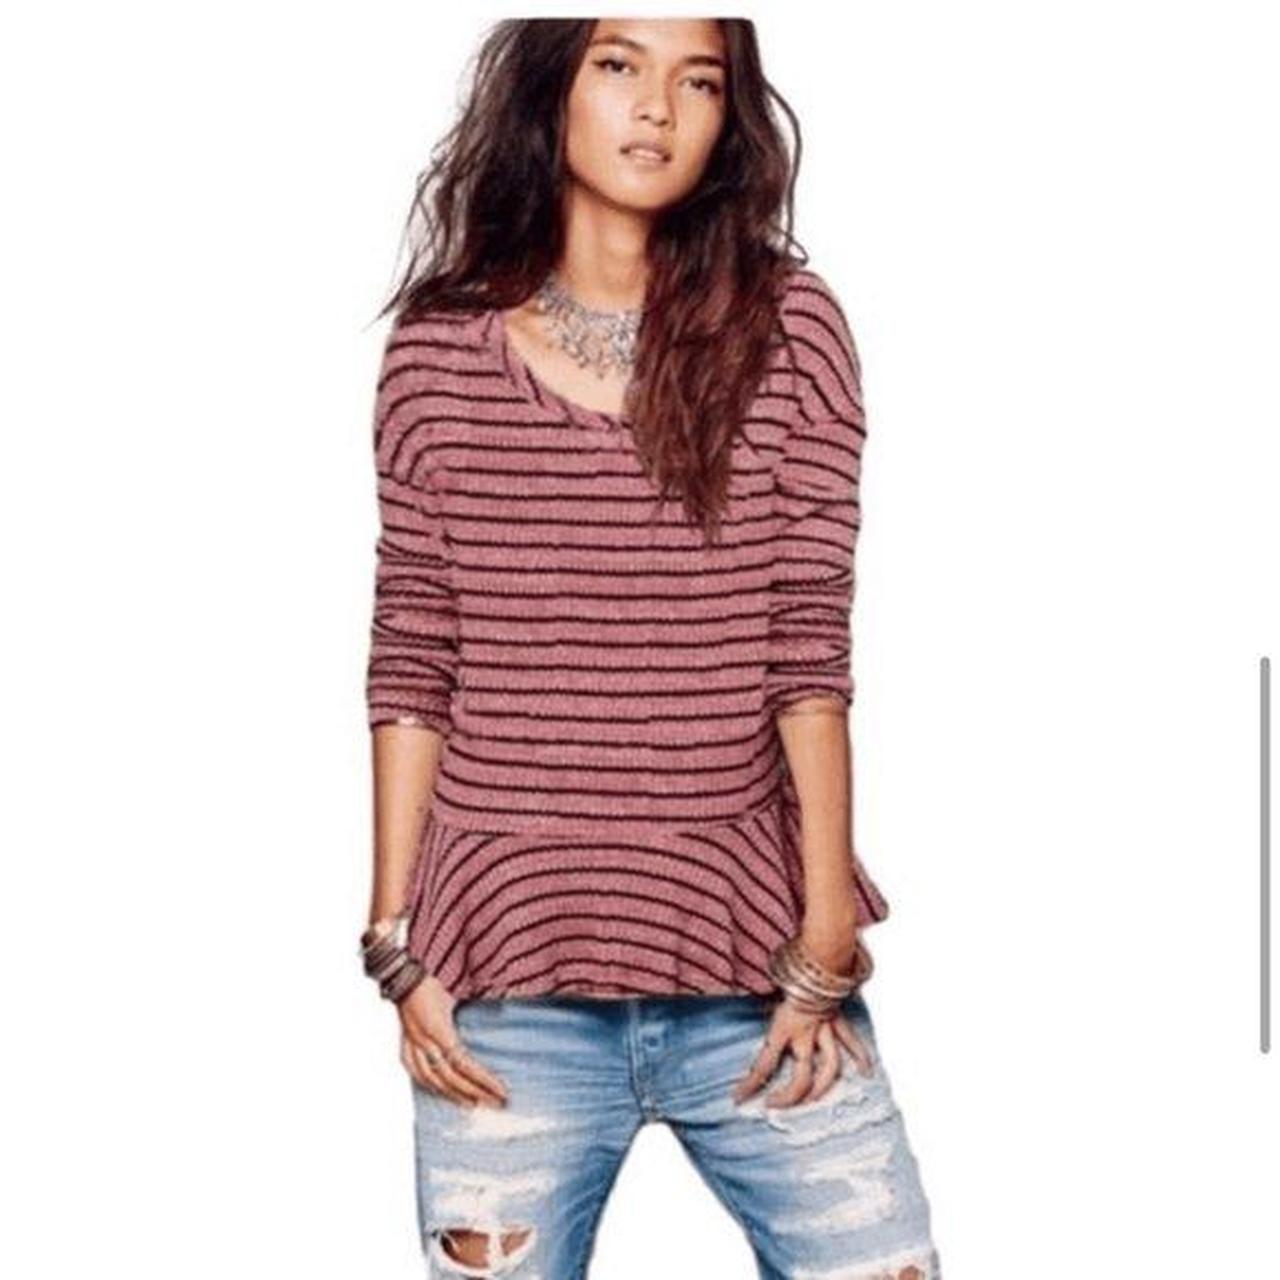 WE THE FREE PEOPLE Womens Waffle Knit Thermal Long Sleeve Shirt S